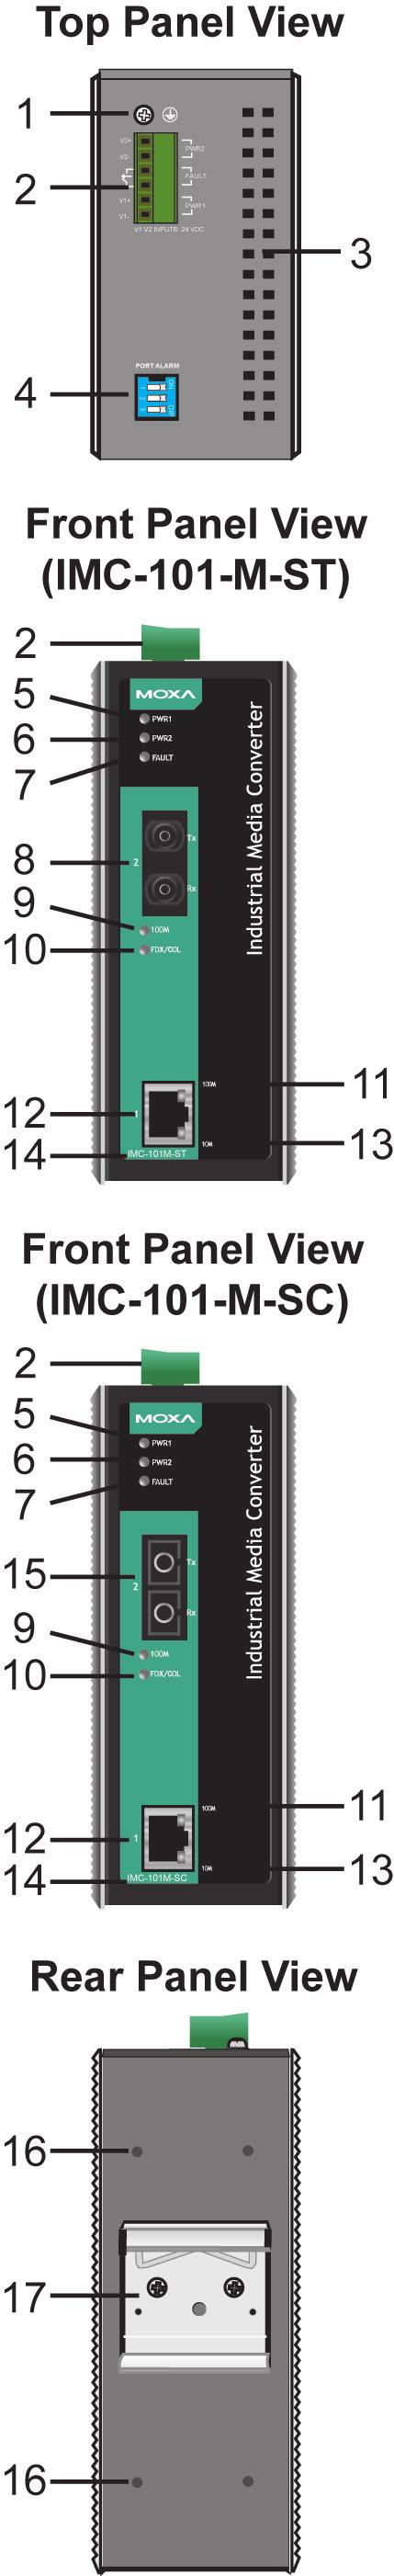 Panel Layout of IMC-101 Series 1. Grounding screw 2. Terminal block for power input PWR1/PWR2 and relay output 3. Heat dissipation vents 4. Dip switch 5. Power input PWR1 LED 6.